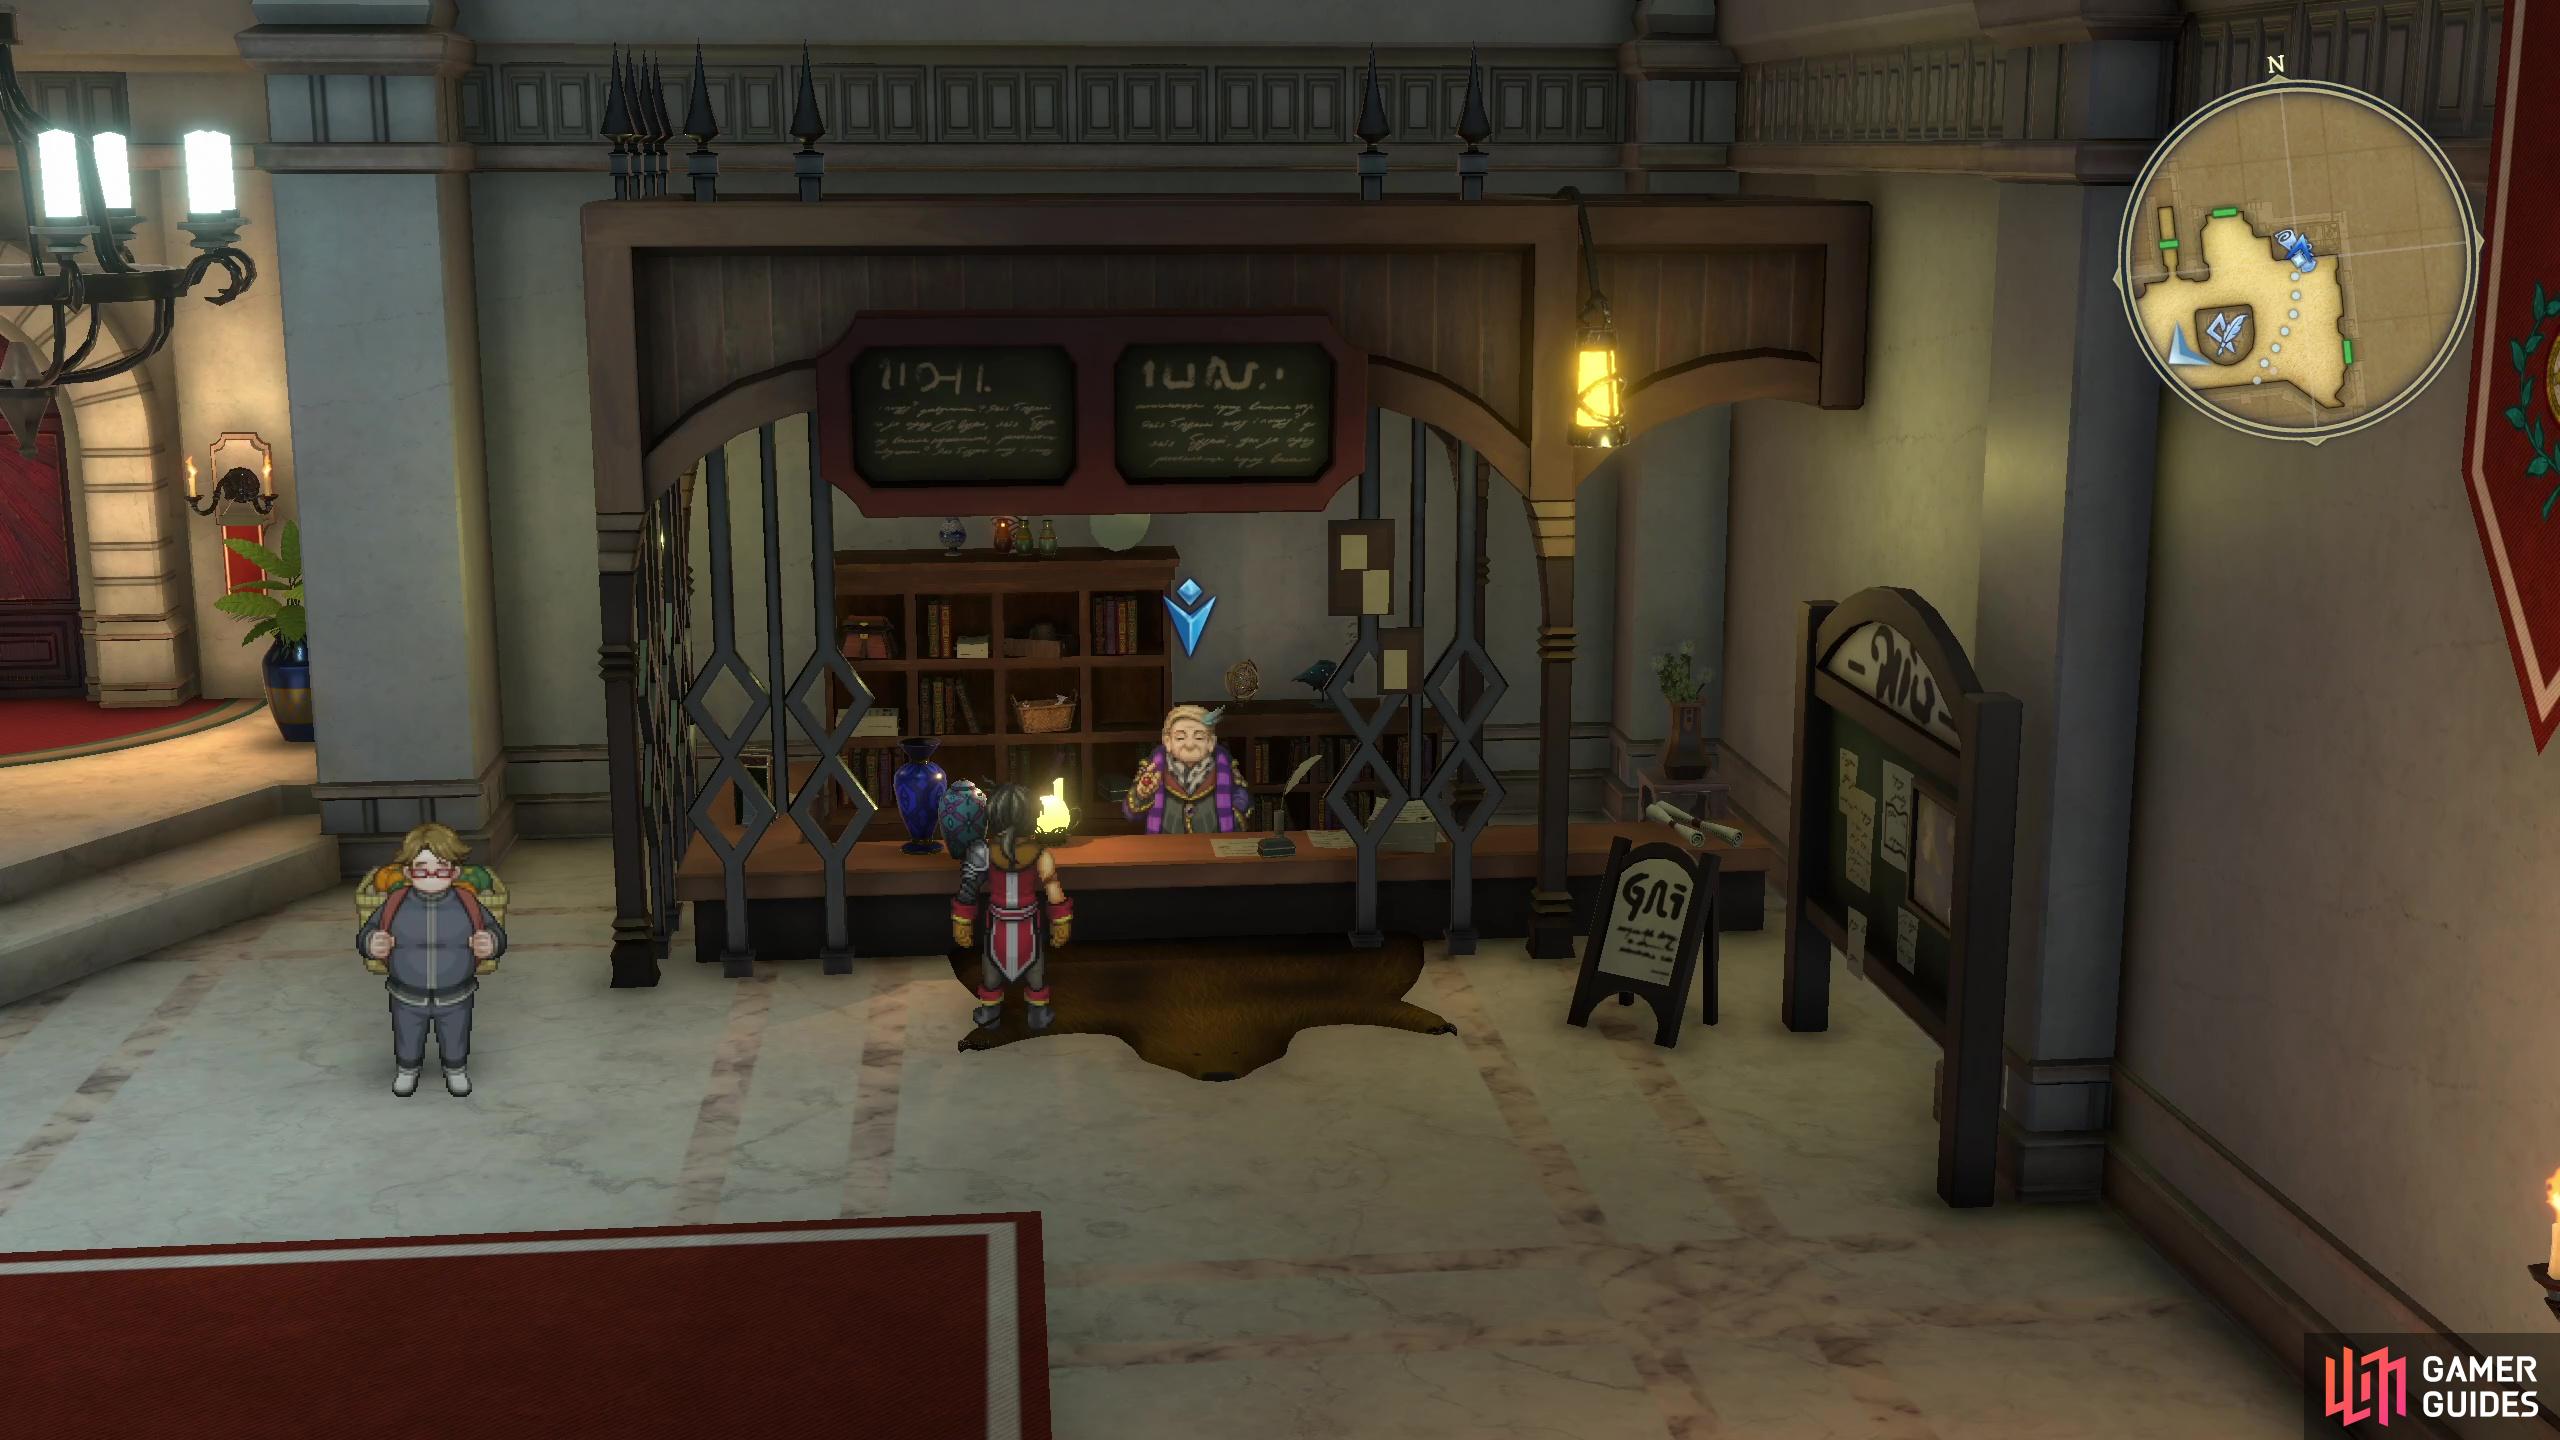 The Mission Guild can be found on the first floor of the castle.